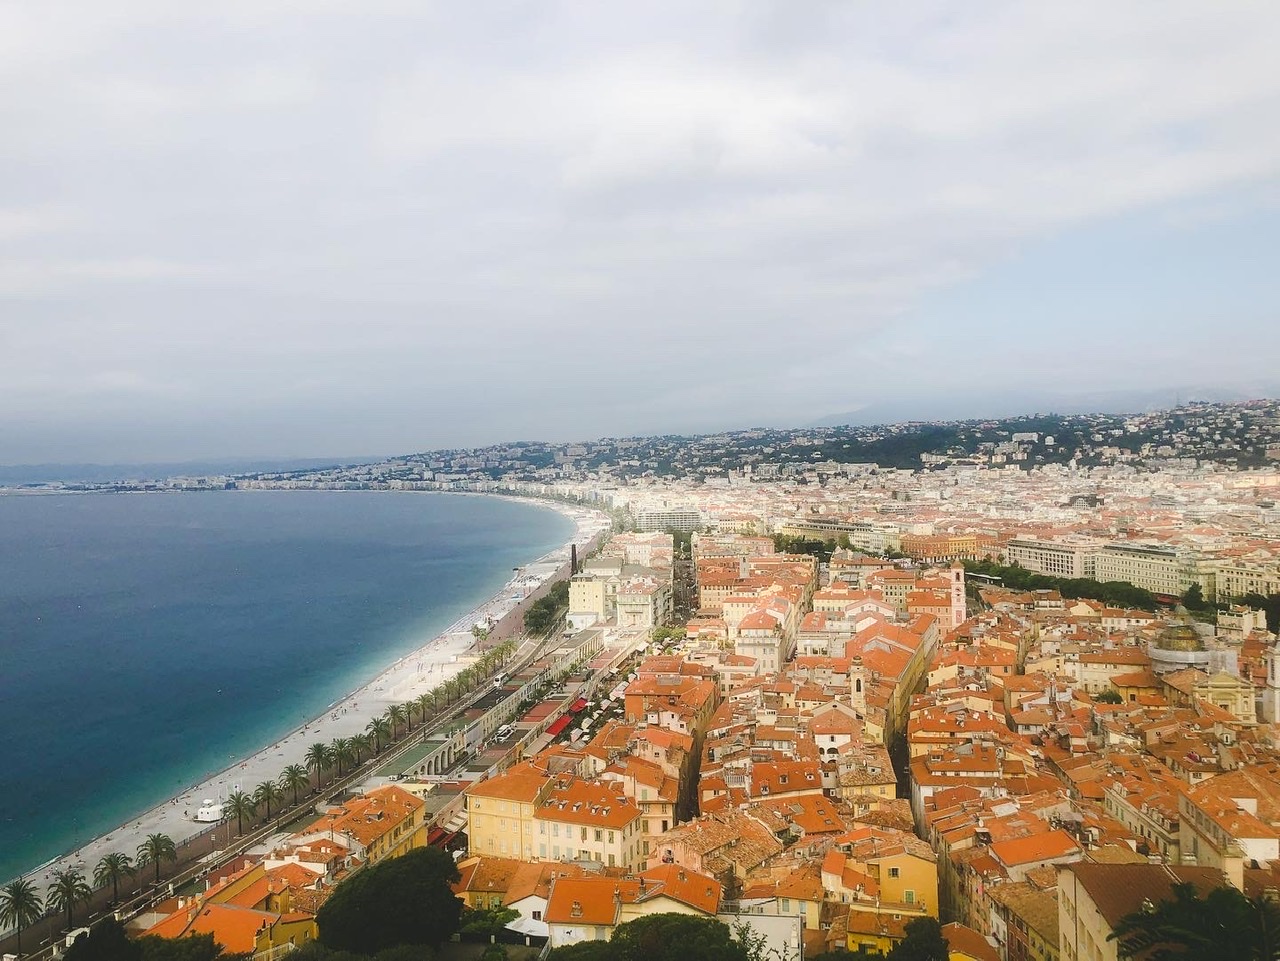 View of Nice Coastline with blue sky and water, sandy beach and largely orange buildings